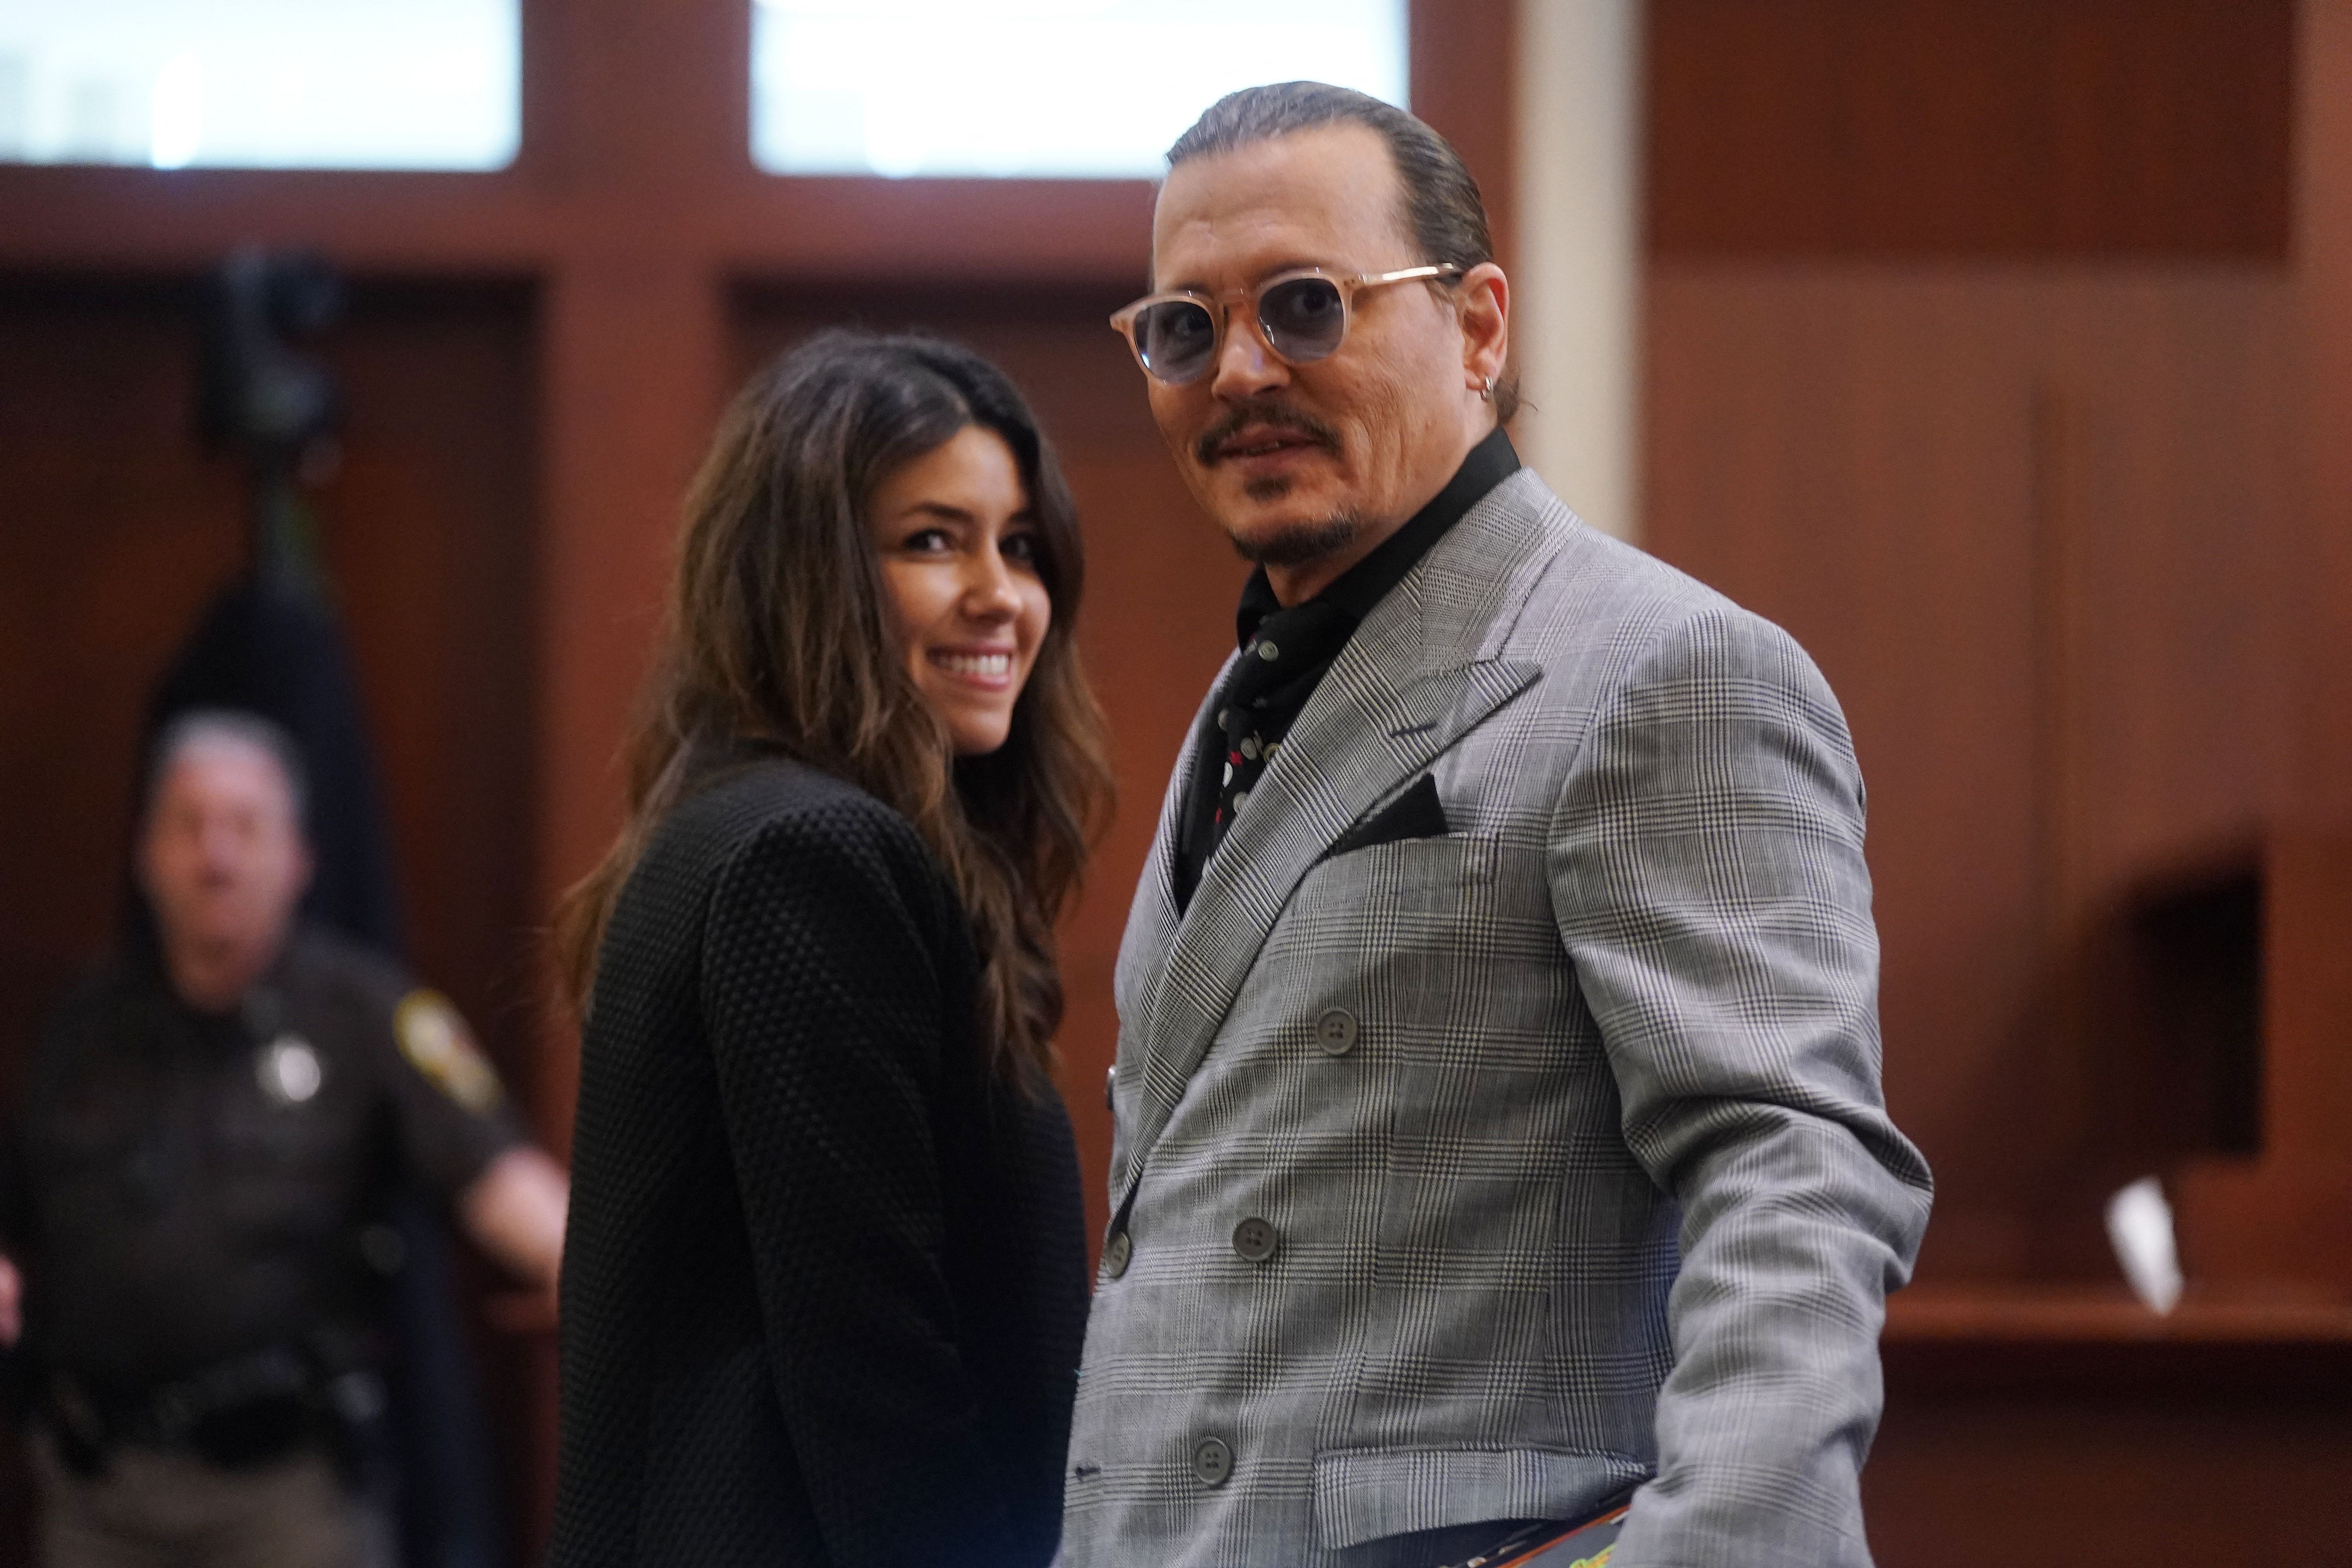 Johnny Depp and Camille Vasquez at the Fairfax County Courthouse in Fairfax, Virginia, on 19 May 2022